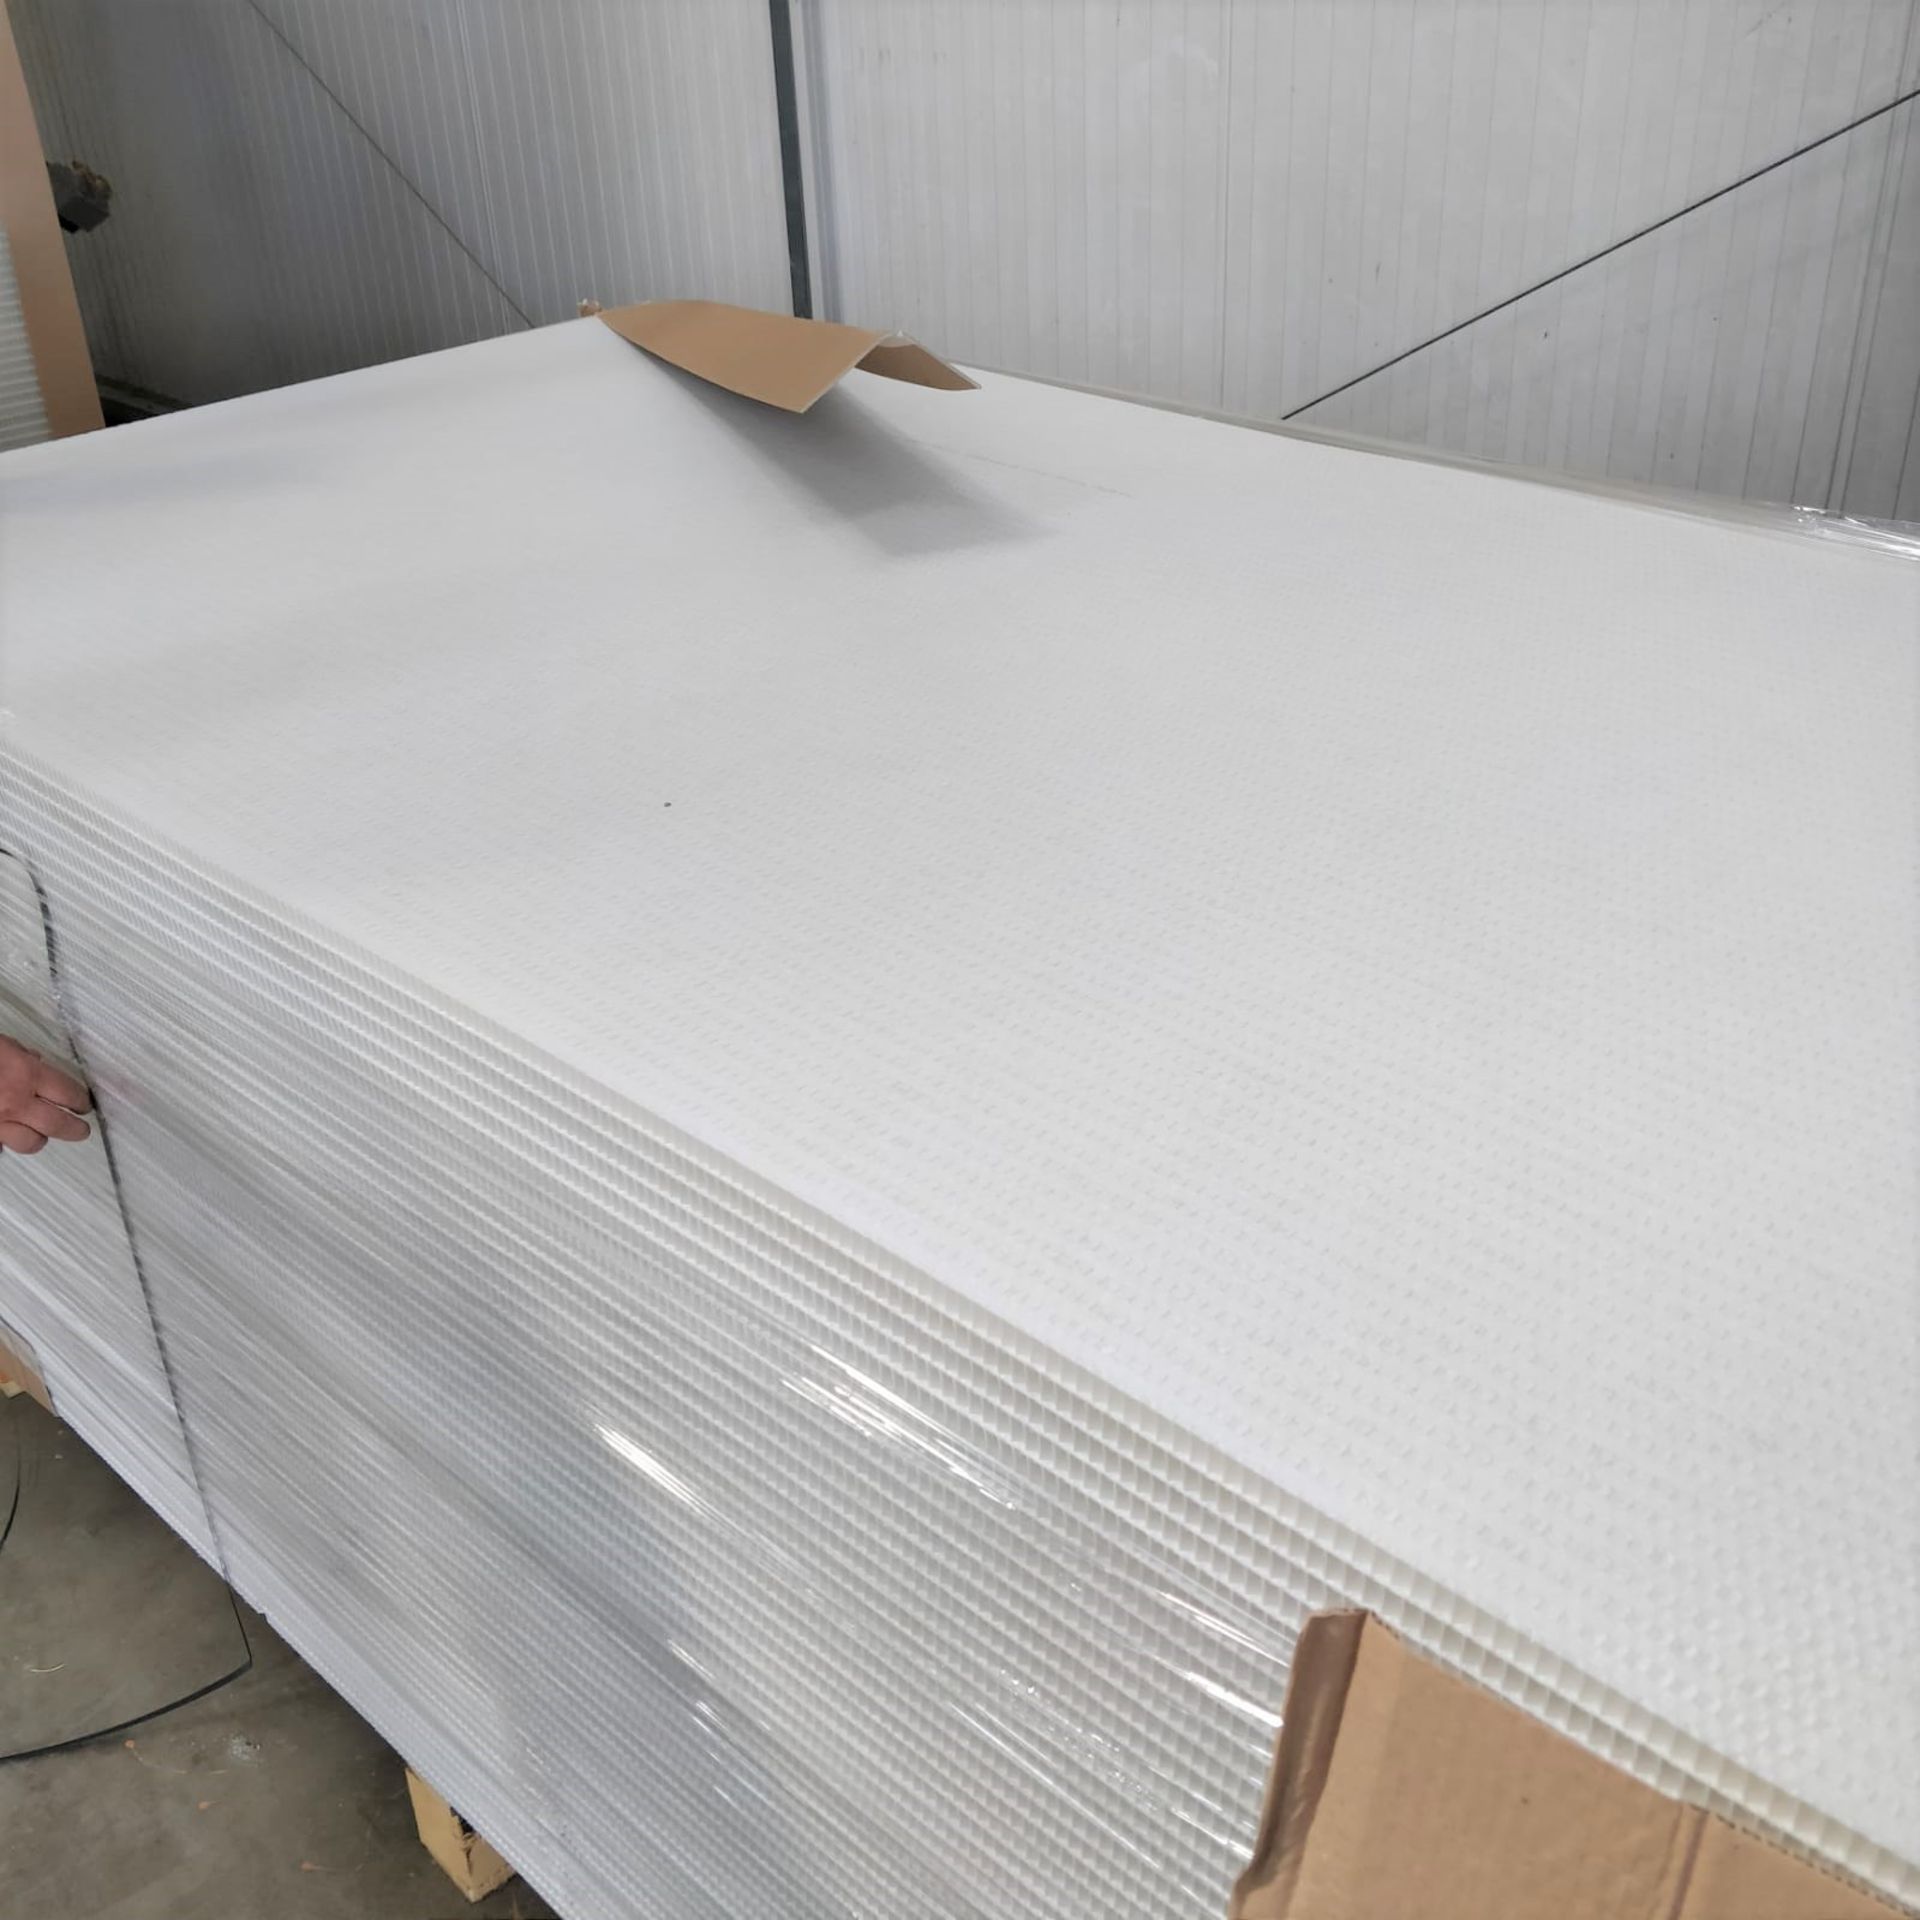 24 x ThermHex Thermoplastic Honeycomb Core Panels - Size Approx 2630 x 1210 x 18mm - New Stock - - Image 5 of 6